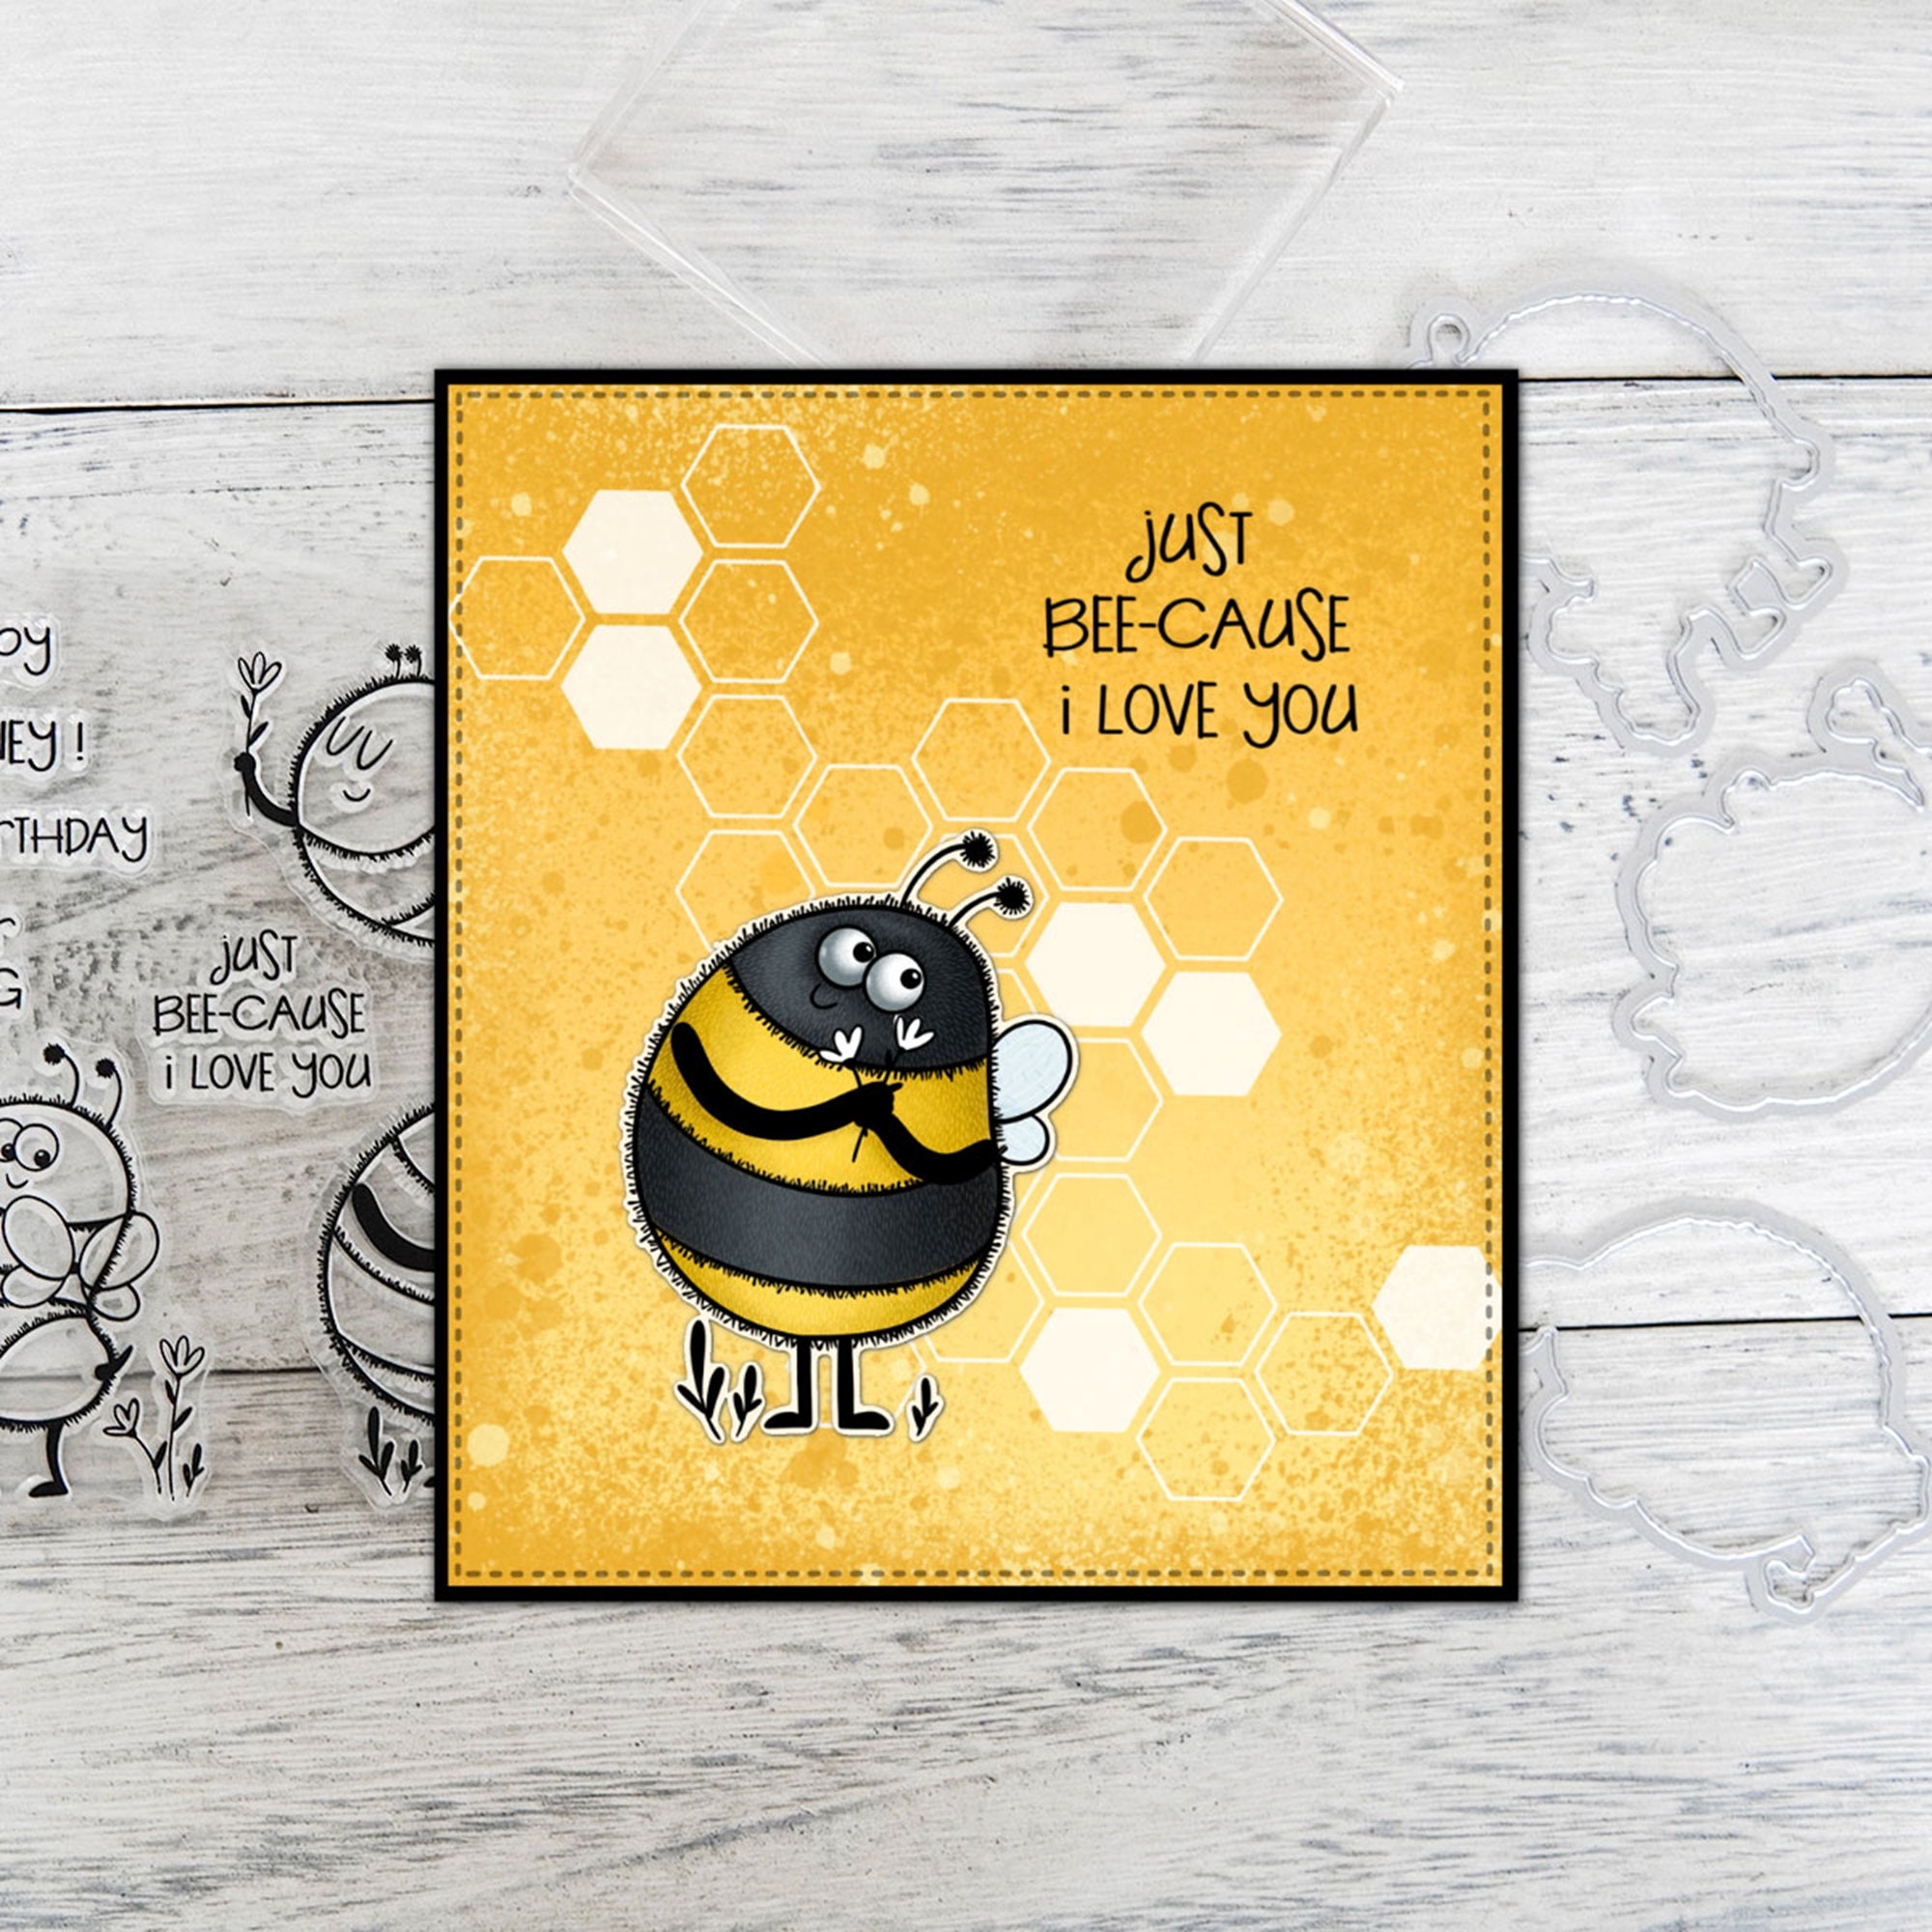 Tiny Bee Honeybee Rubber Stamp 16mm, Small Realistic Bee Stamp for  Journals, Honey Jar Labels Stamp Handmade by Blossom Stamps 